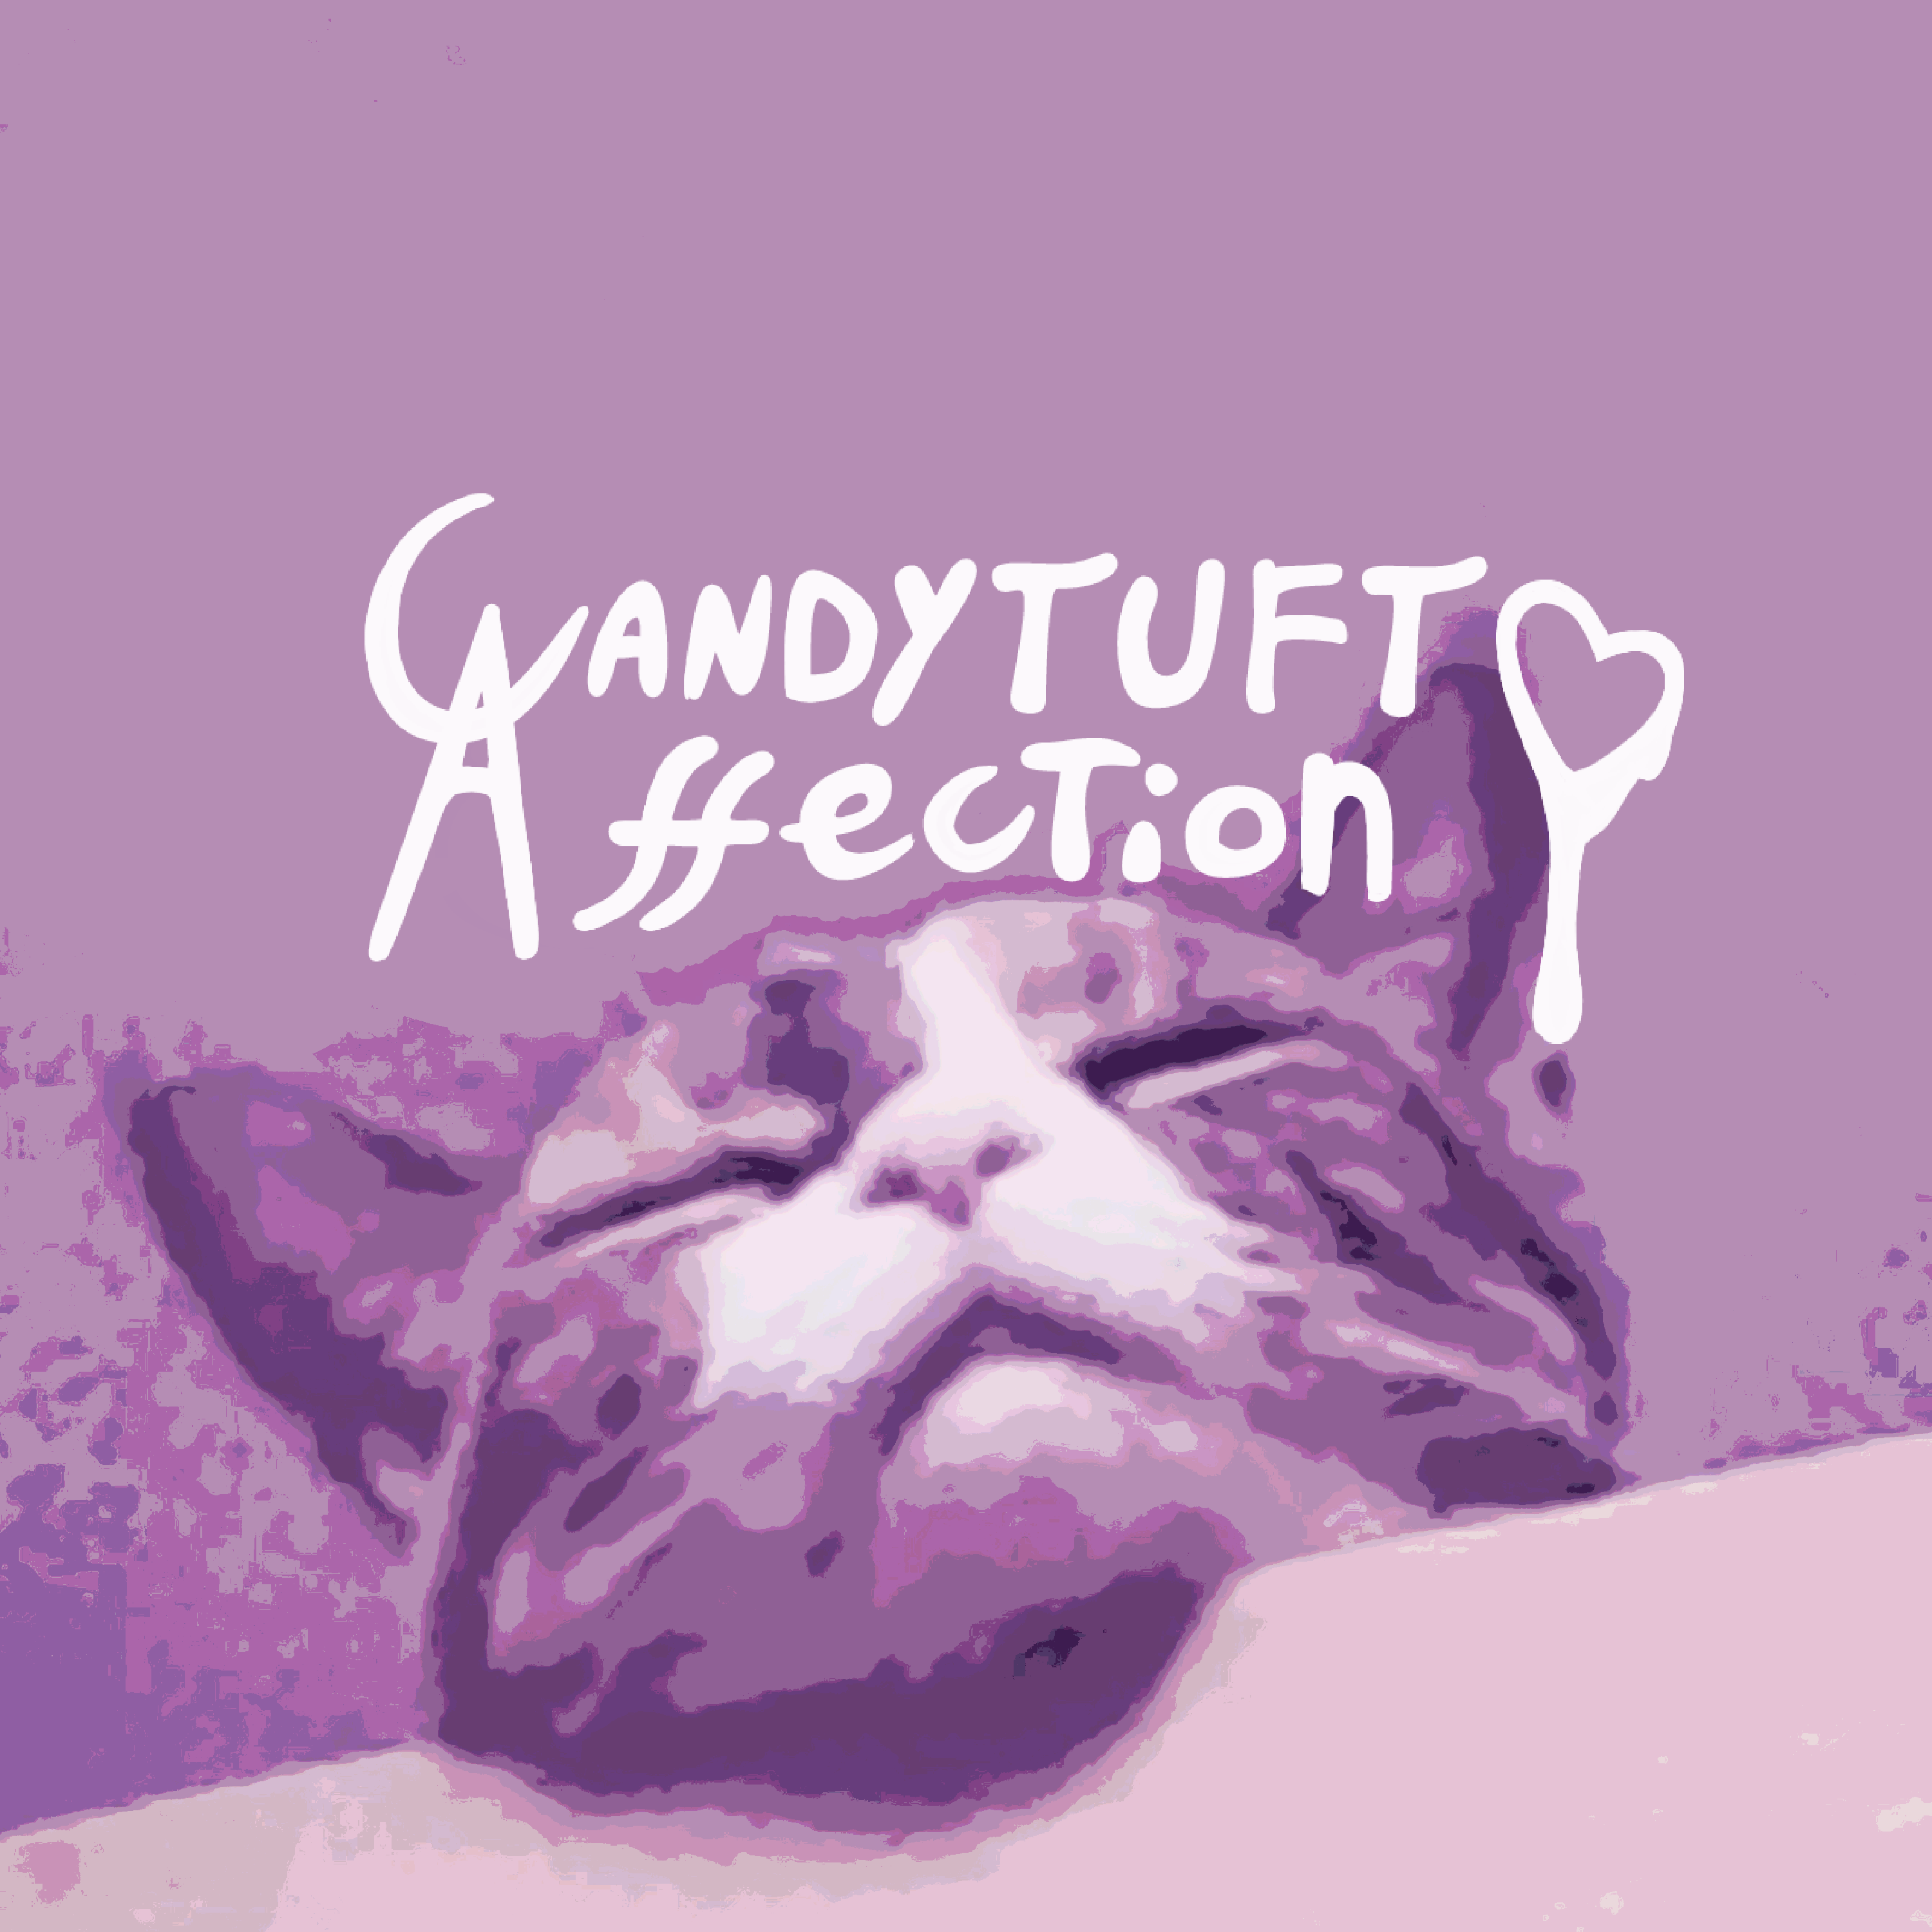 monochrome purple picture of a sleeping cat, with the candytuft affection logo overlaid on top.